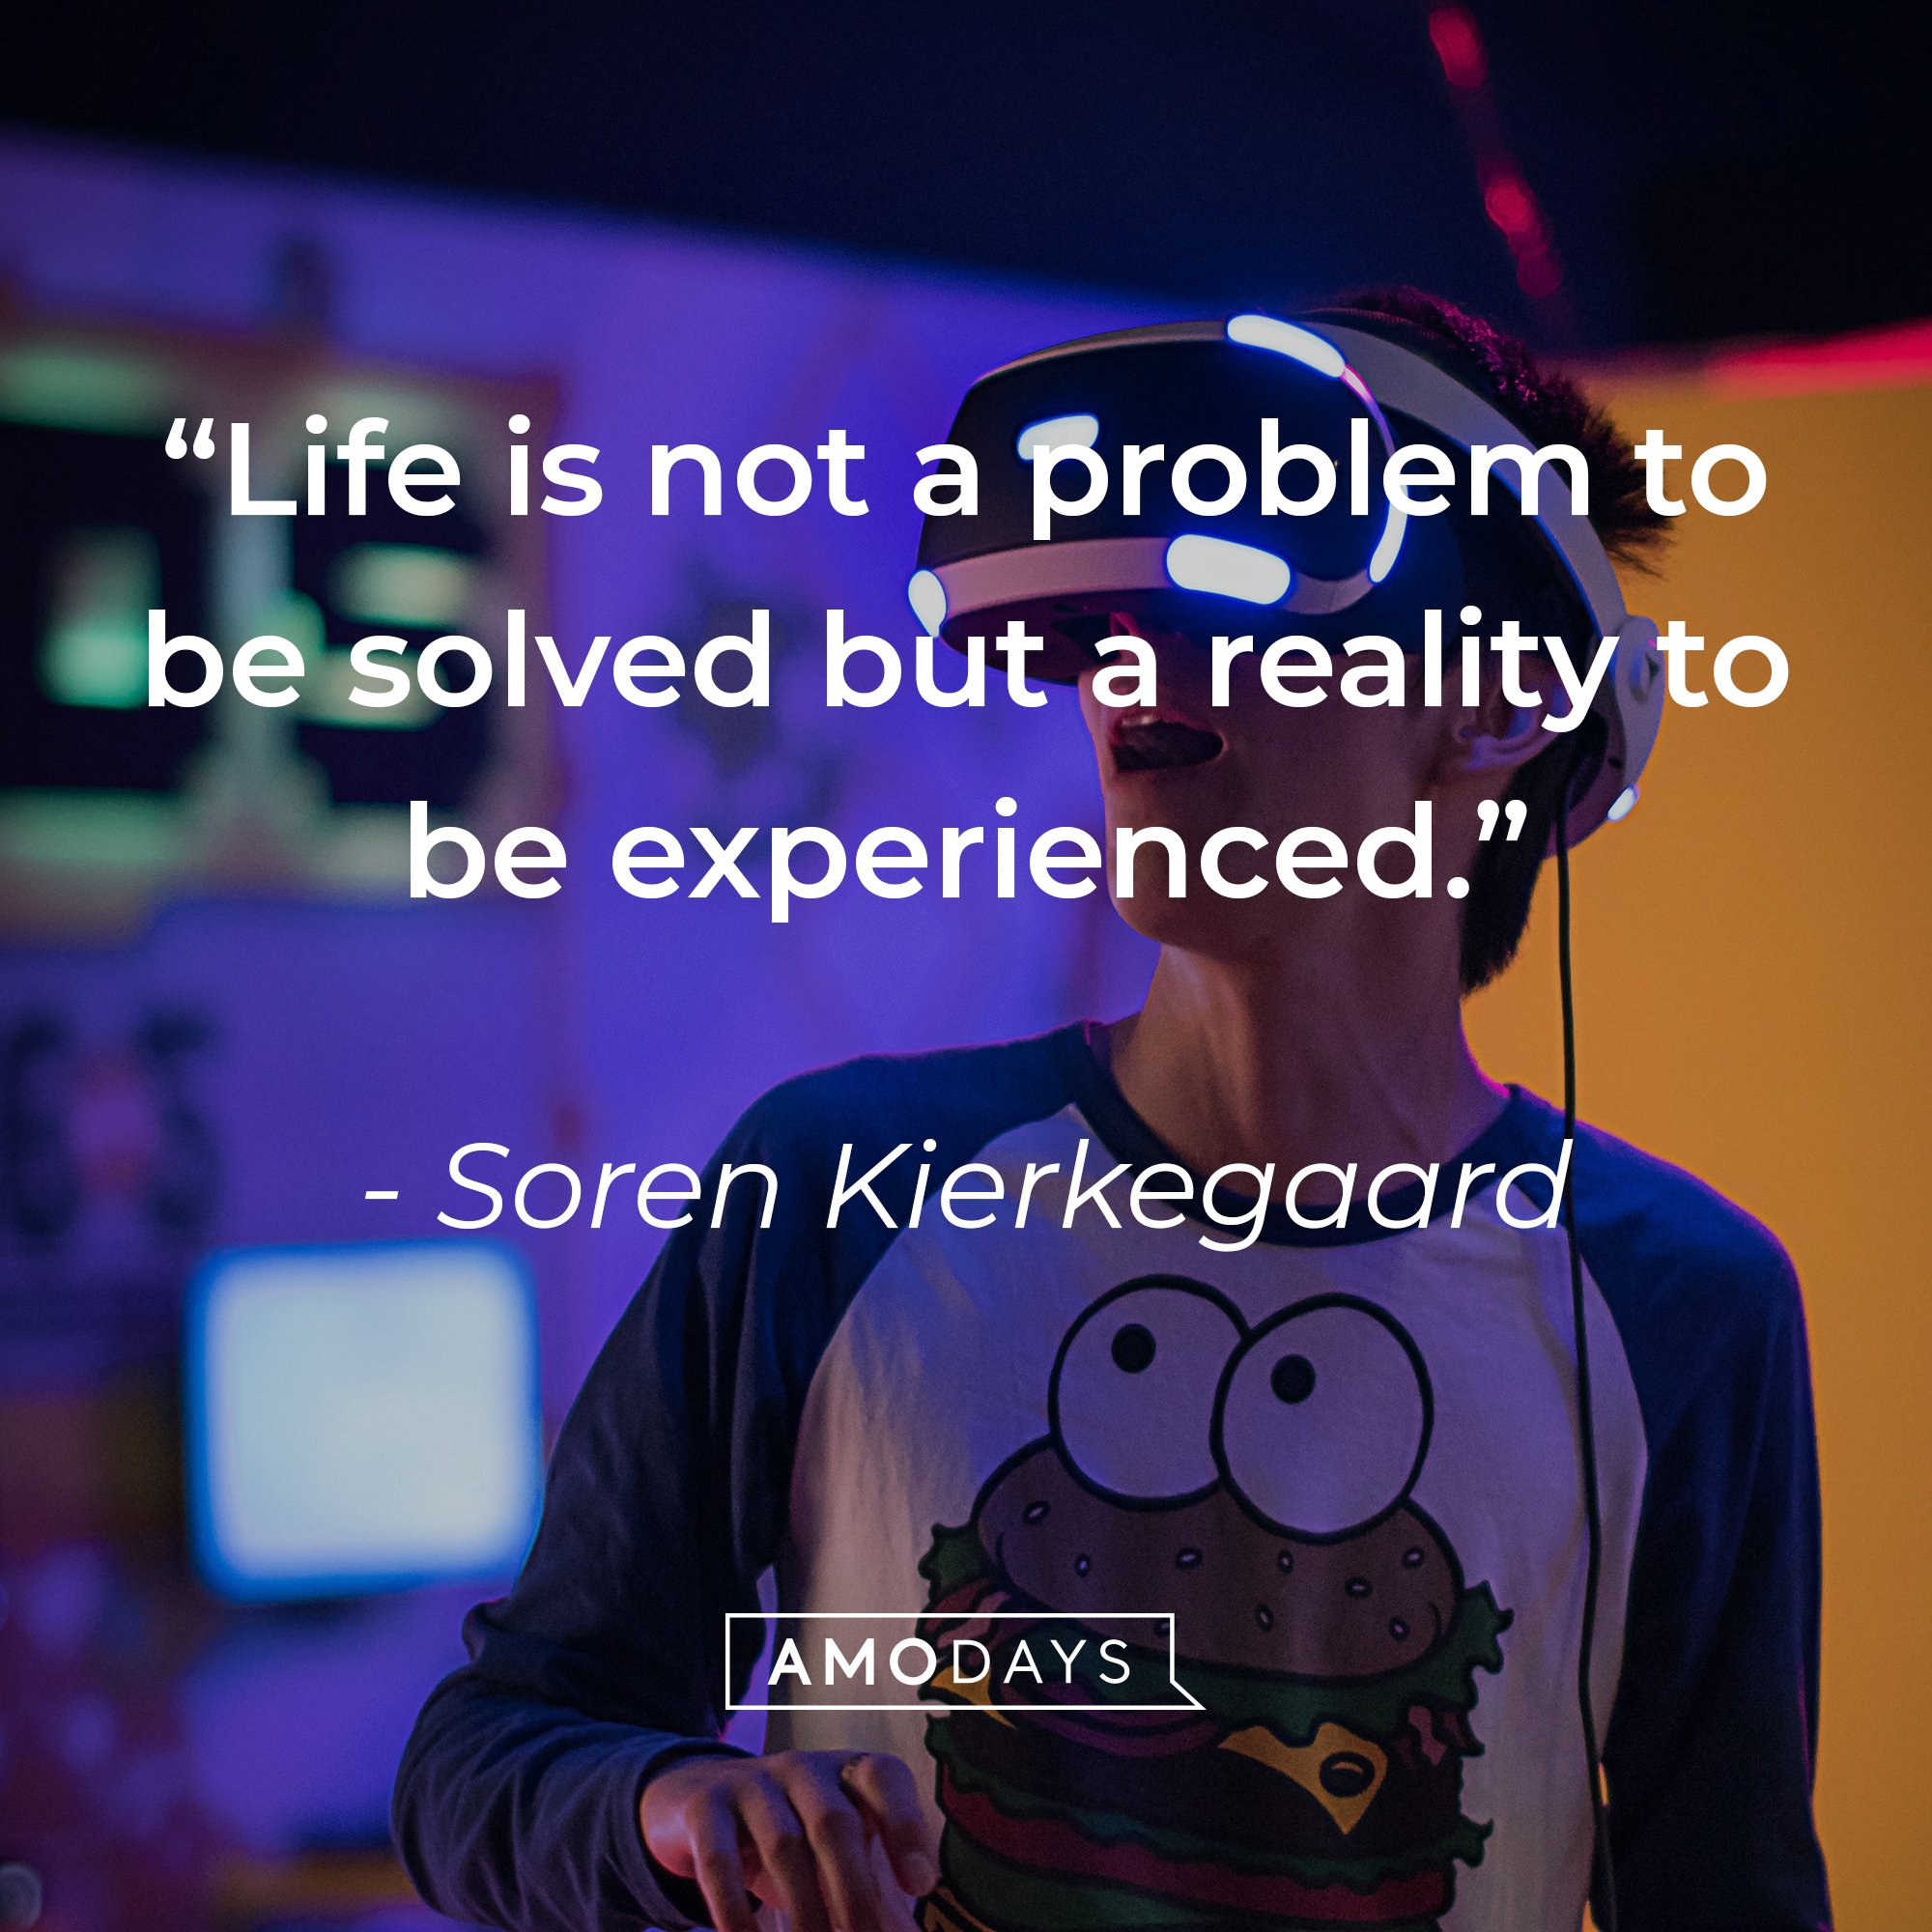 Soren Kierkegaard’s quote: “Life is not a problem to be solved but a reality to be experienced.” | Image: Amodays